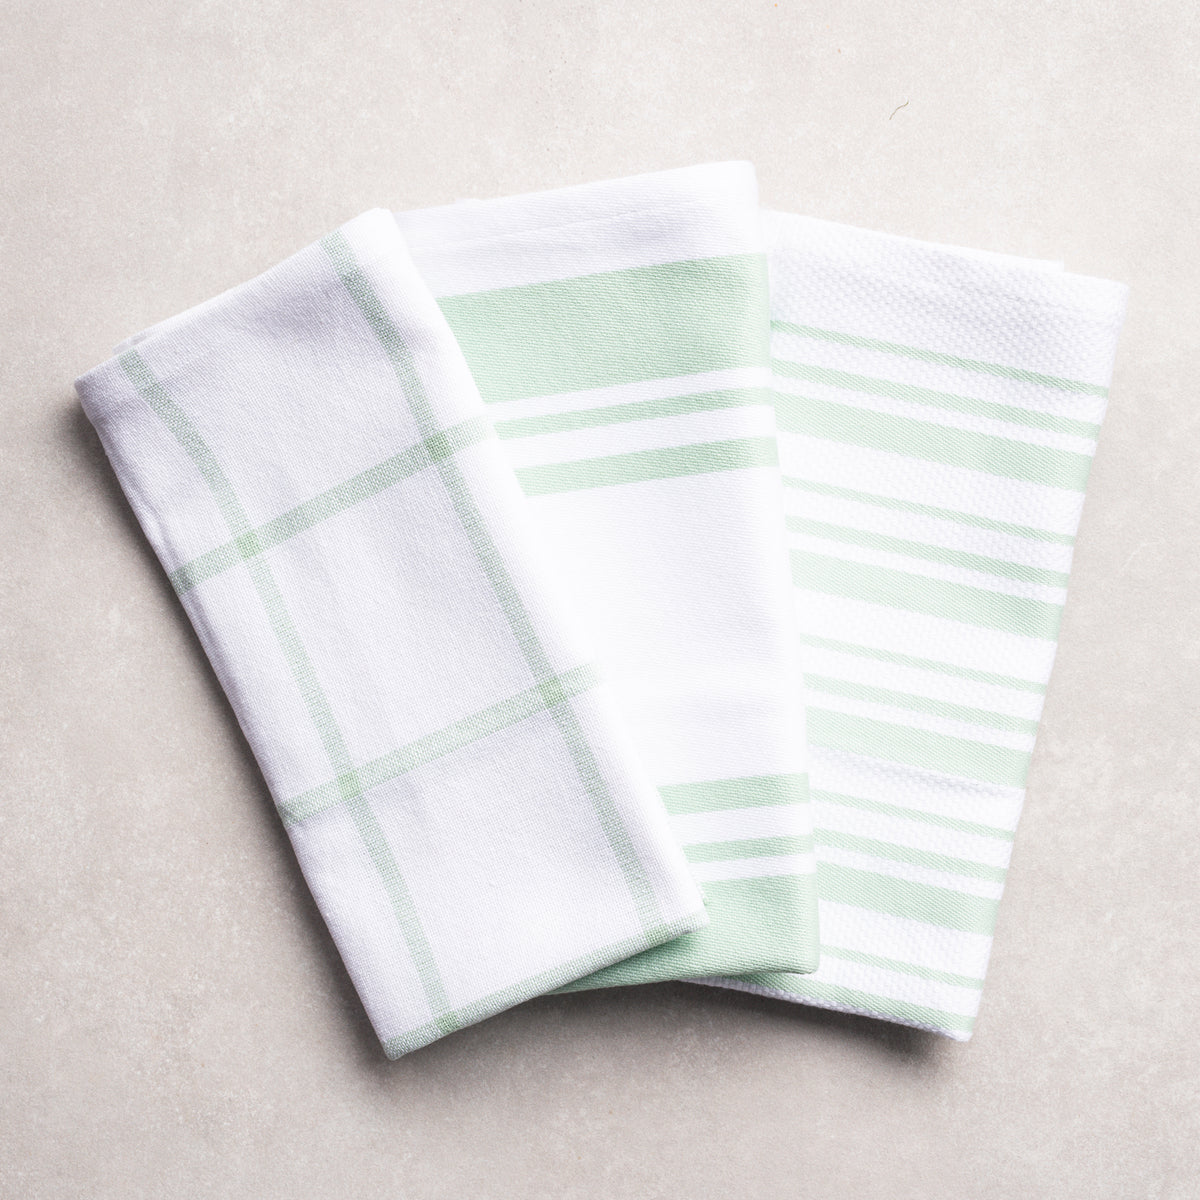 Buy Set of 24 Green Cotton Kitchen Towels Dish Cloth Scrubbing